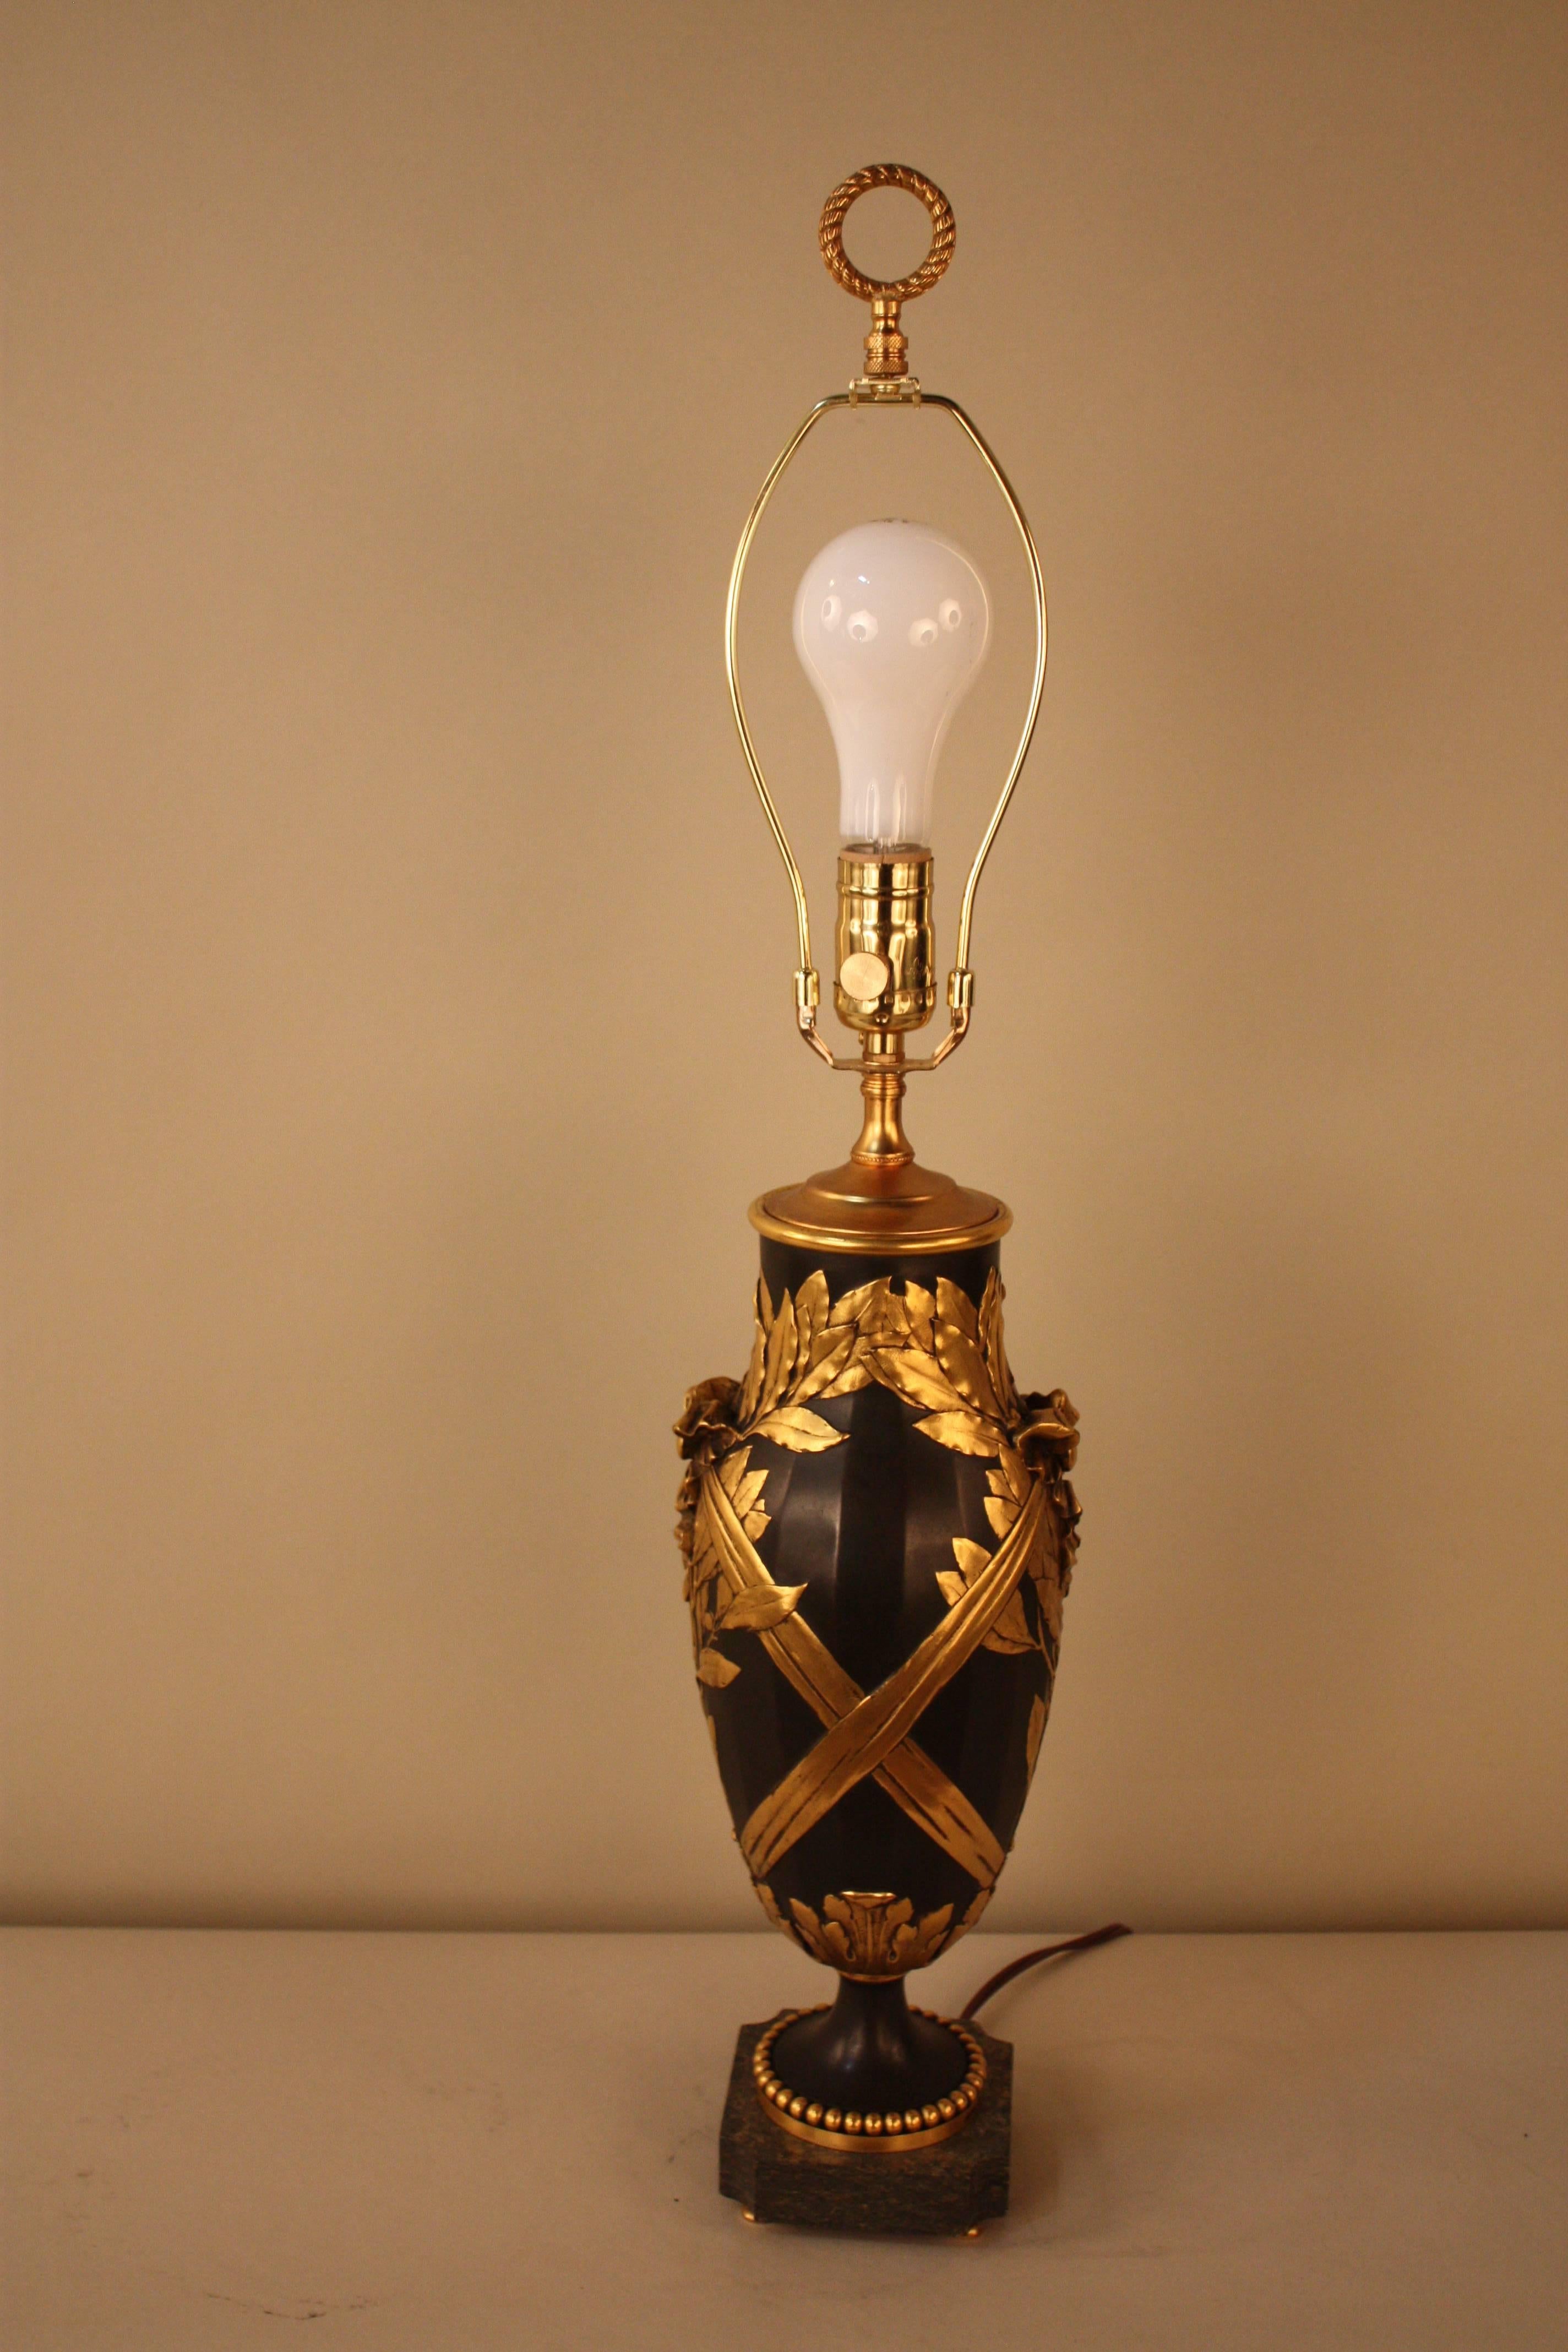 Gilt French Ormolu and Patinated Bronze Table Lamp by Christofle